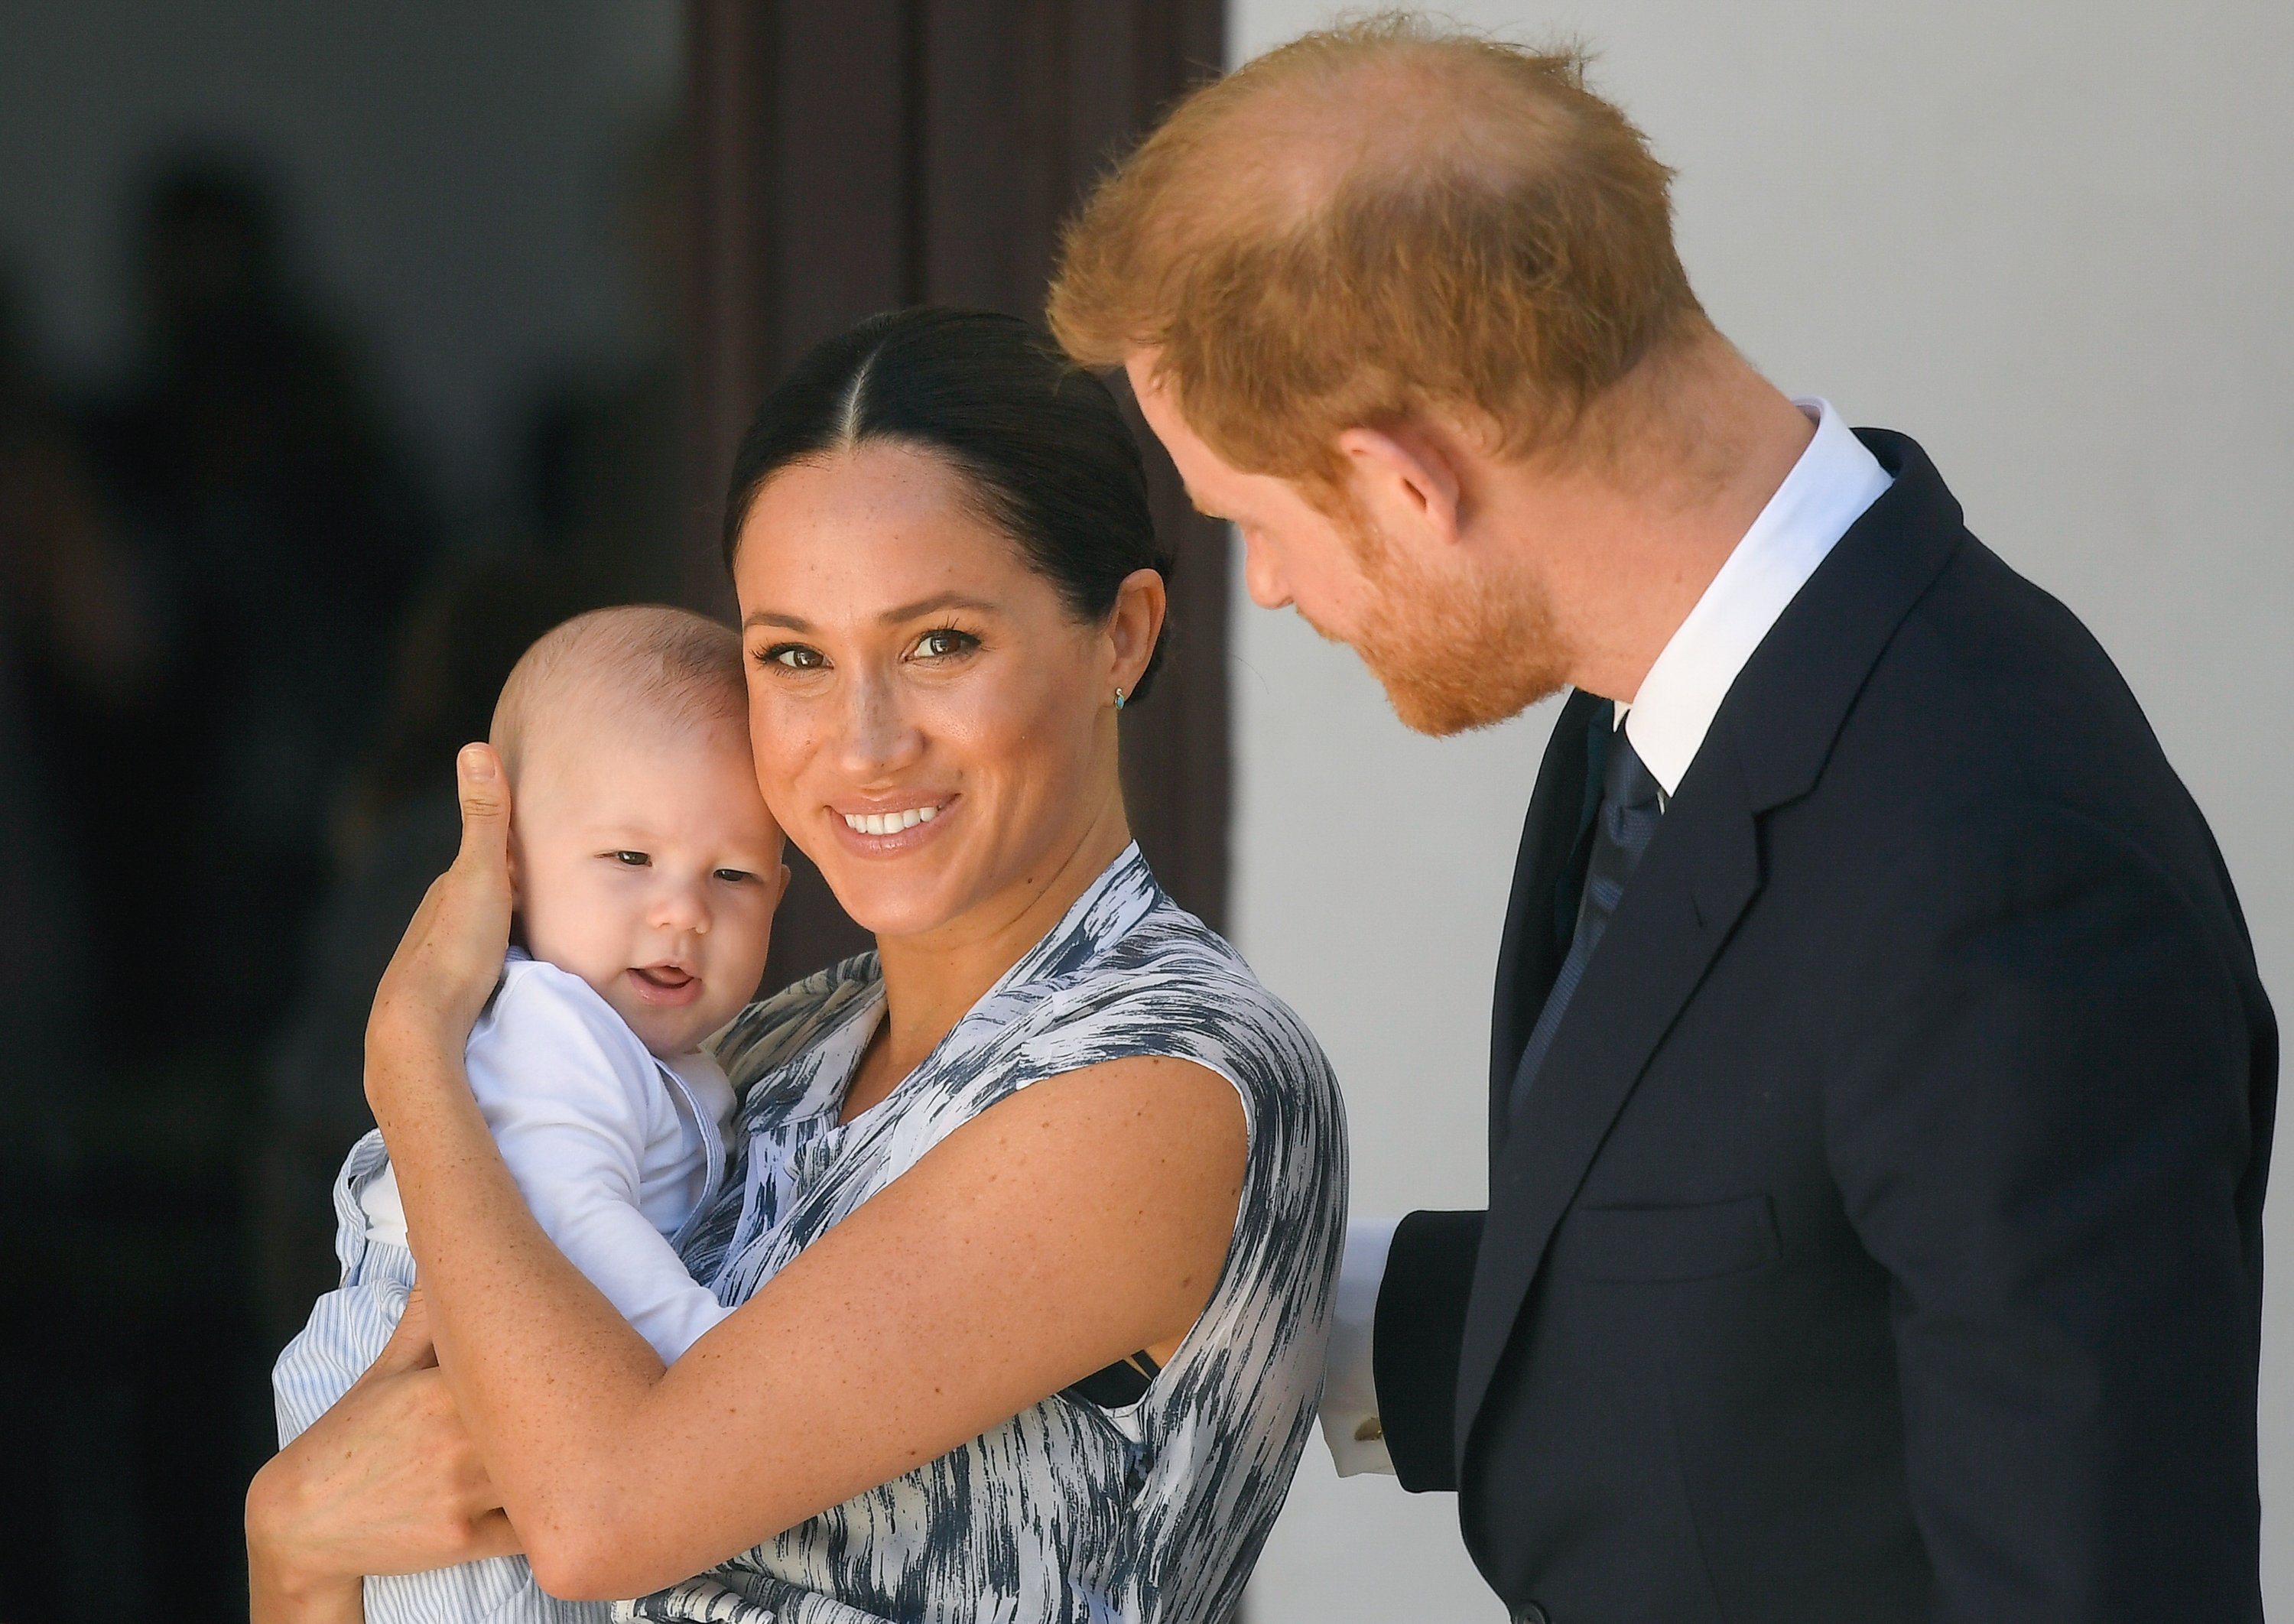 Prince Harry, Duke of Sussex, Meghan, Duchess of Sussex and their baby son Archie Mountbatten-Windsor meet Archbishop Desmond Tutu and his daughter Thandeka Tutu-Gxashe at the Desmond & Leah Tutu Legacy Foundation during their royal tour of South Africa on September 25, 2019 in Cape Town, South Africa. | Source: Getty images